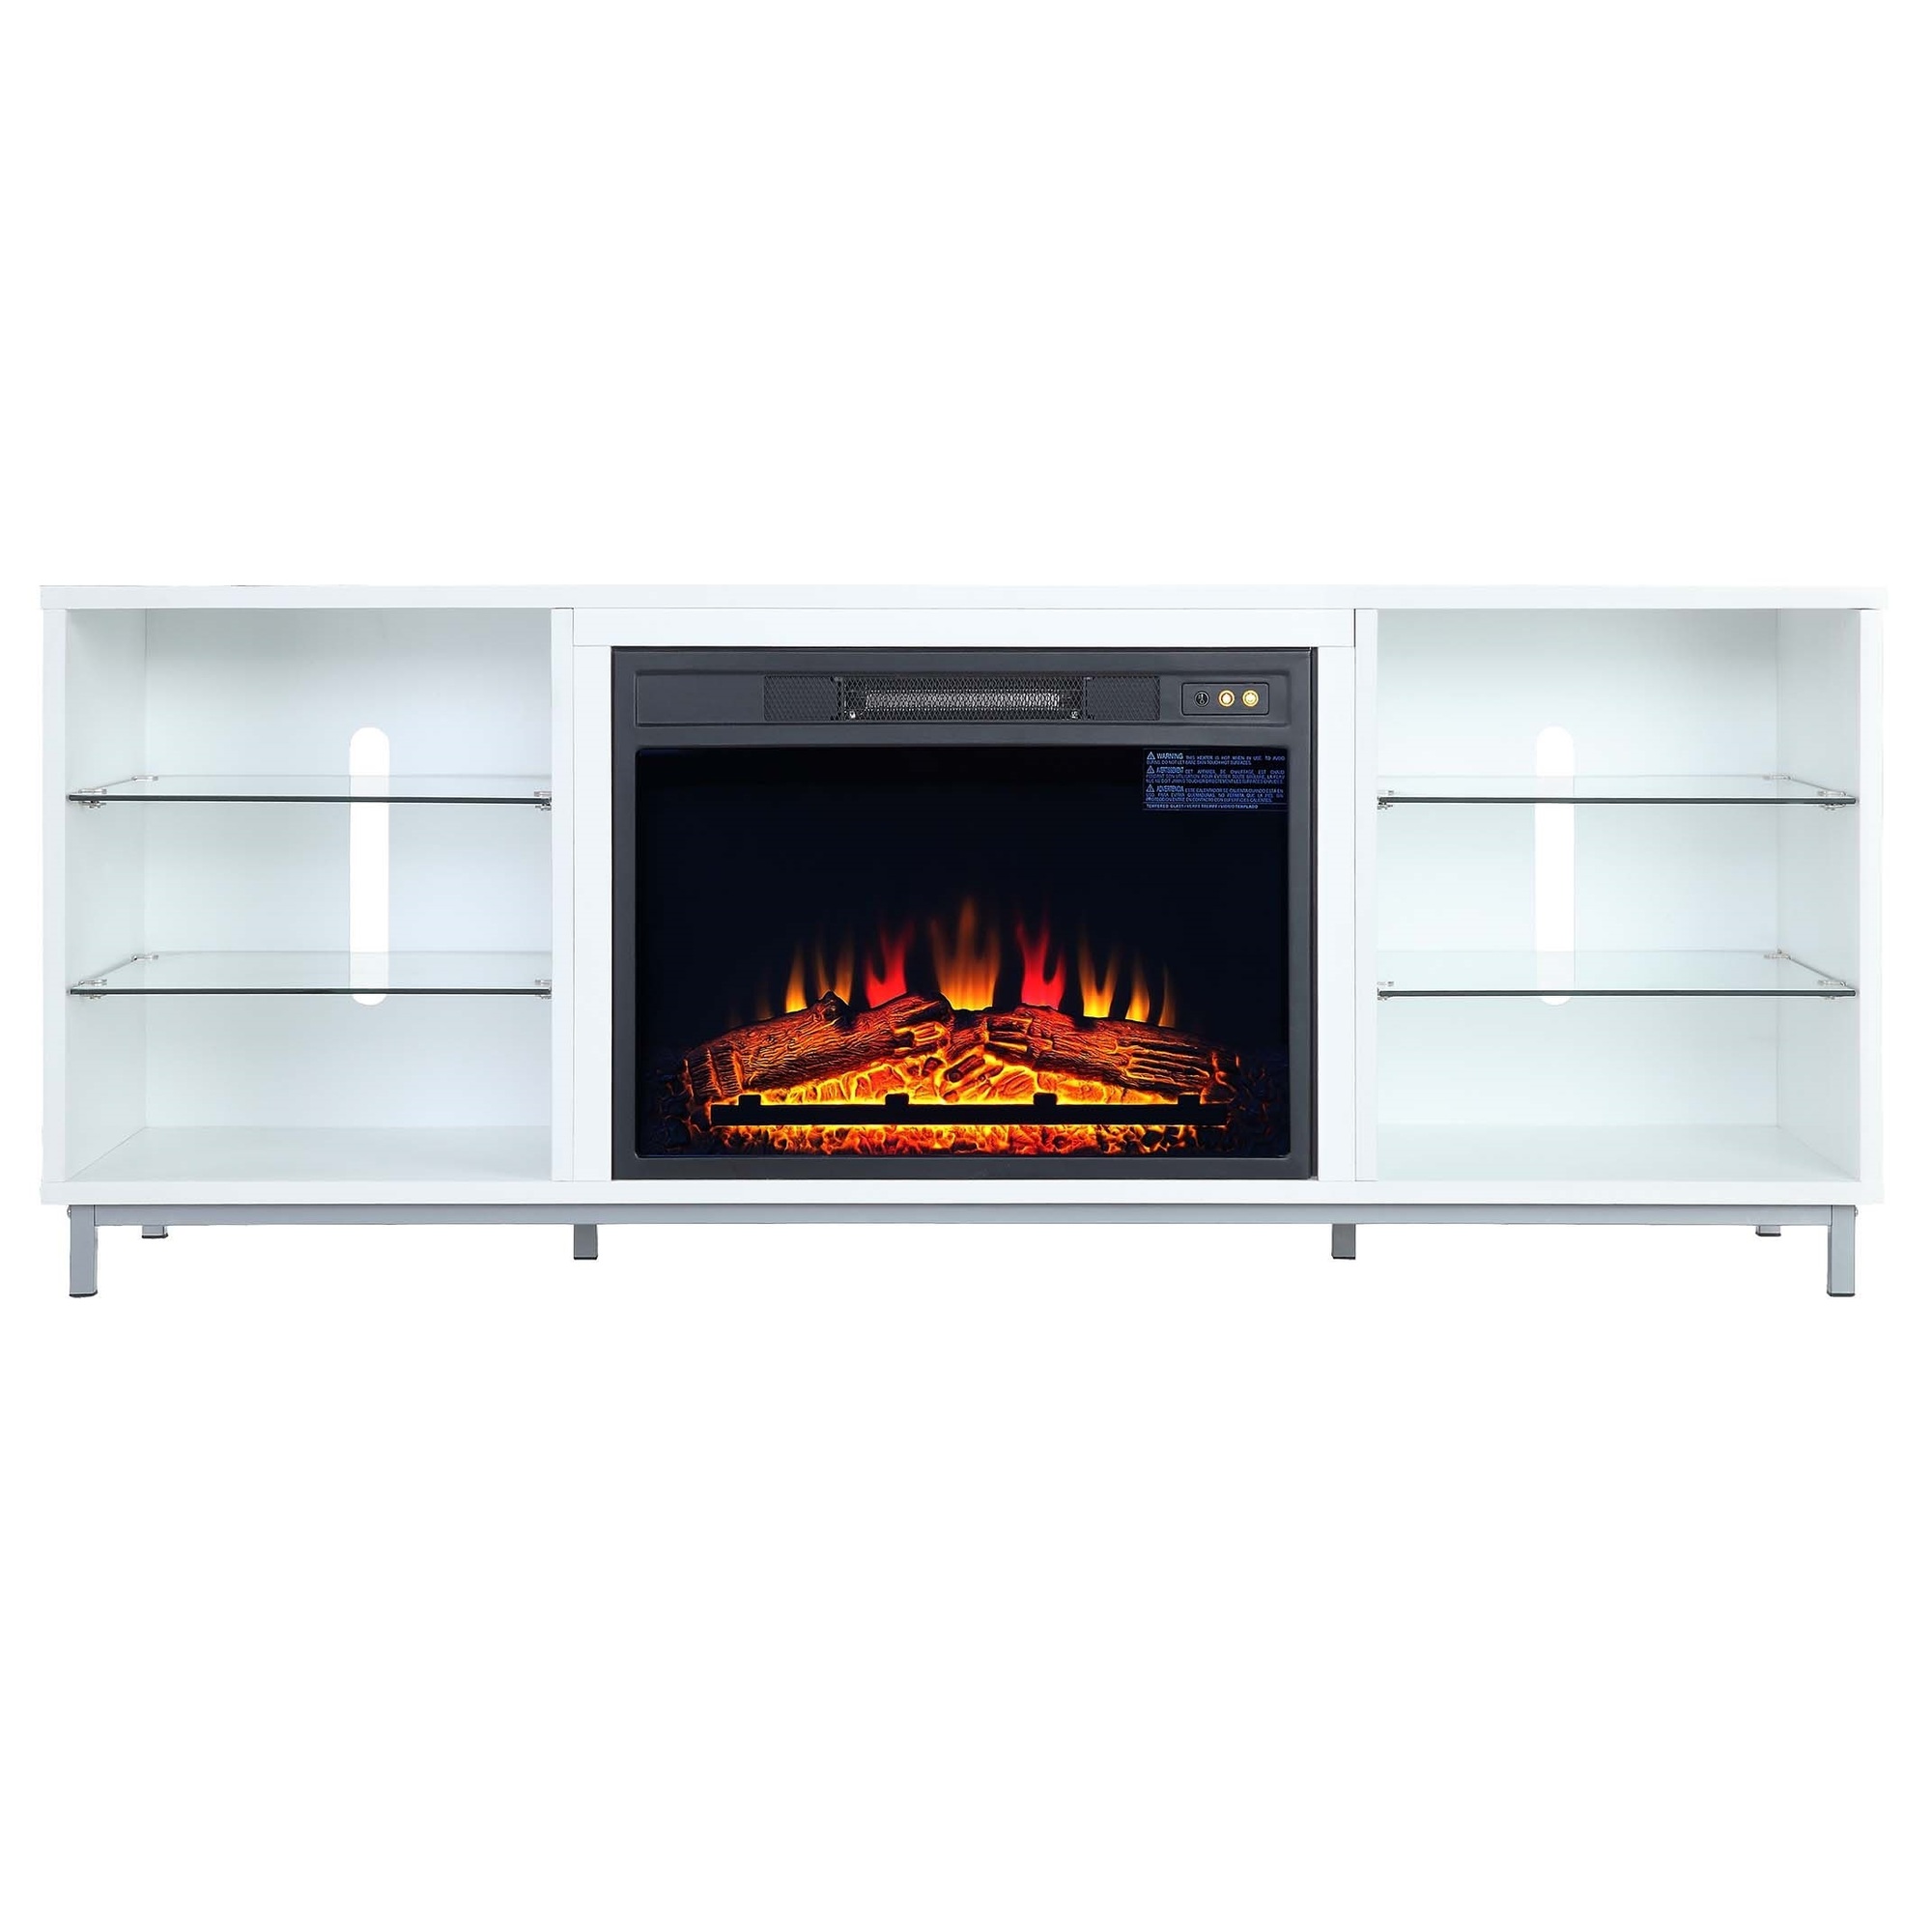 Manhattan Comfort, Brighton 60Inch Fireplace with Glass Shelves in White, Width 60 in, Height 24 in, Depth 16 in, Model FP4